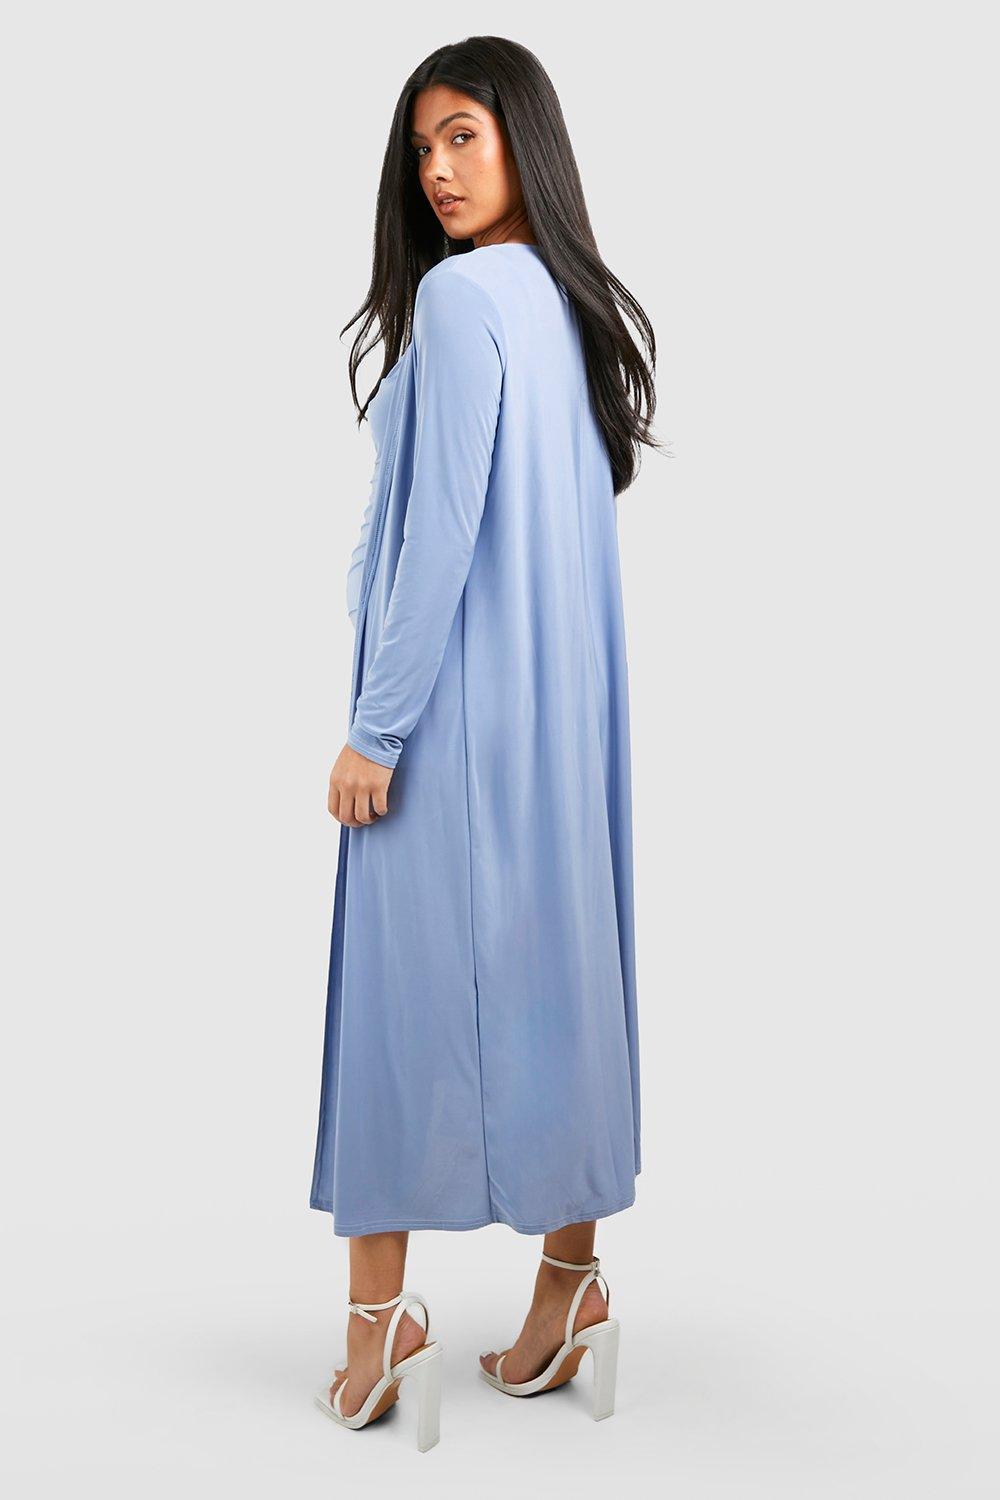 Boohoo Maternity Strappy Cowl Neck Dress And Duster Coat in Blue